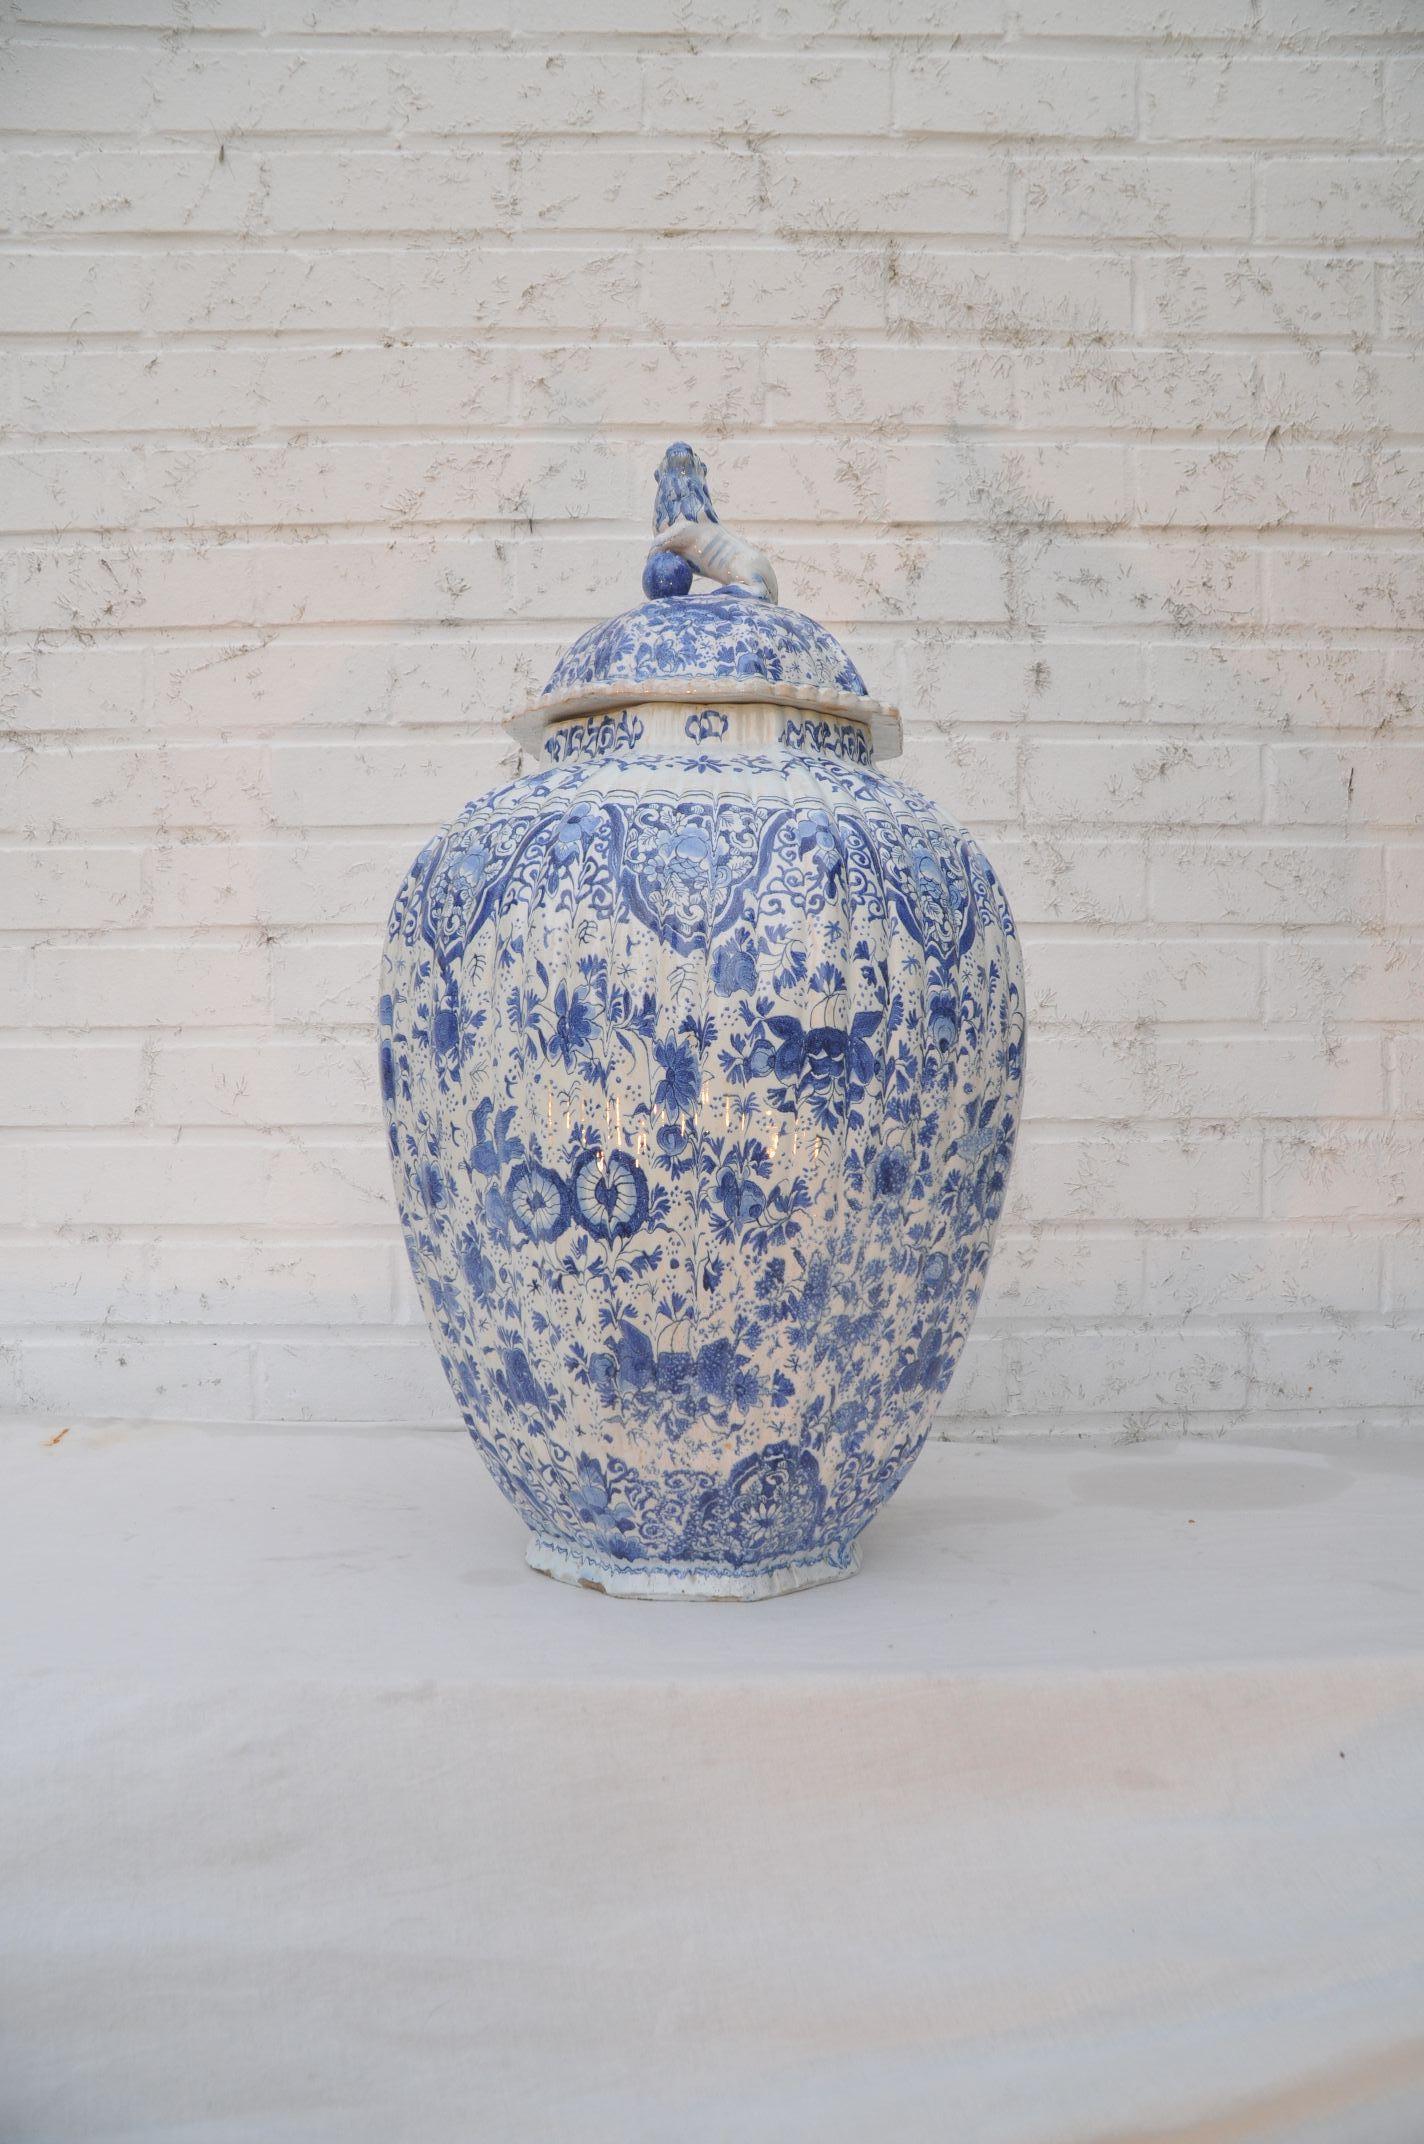 Large pair of Dutch Delft Jars circa 1800 signed in underglaze blue with an ax.
The octagonal ribbed baluster body strewn all over with myriads of flowers, 
peacocks and geometric lines to the upright neck.
The domed cover decorated en suite